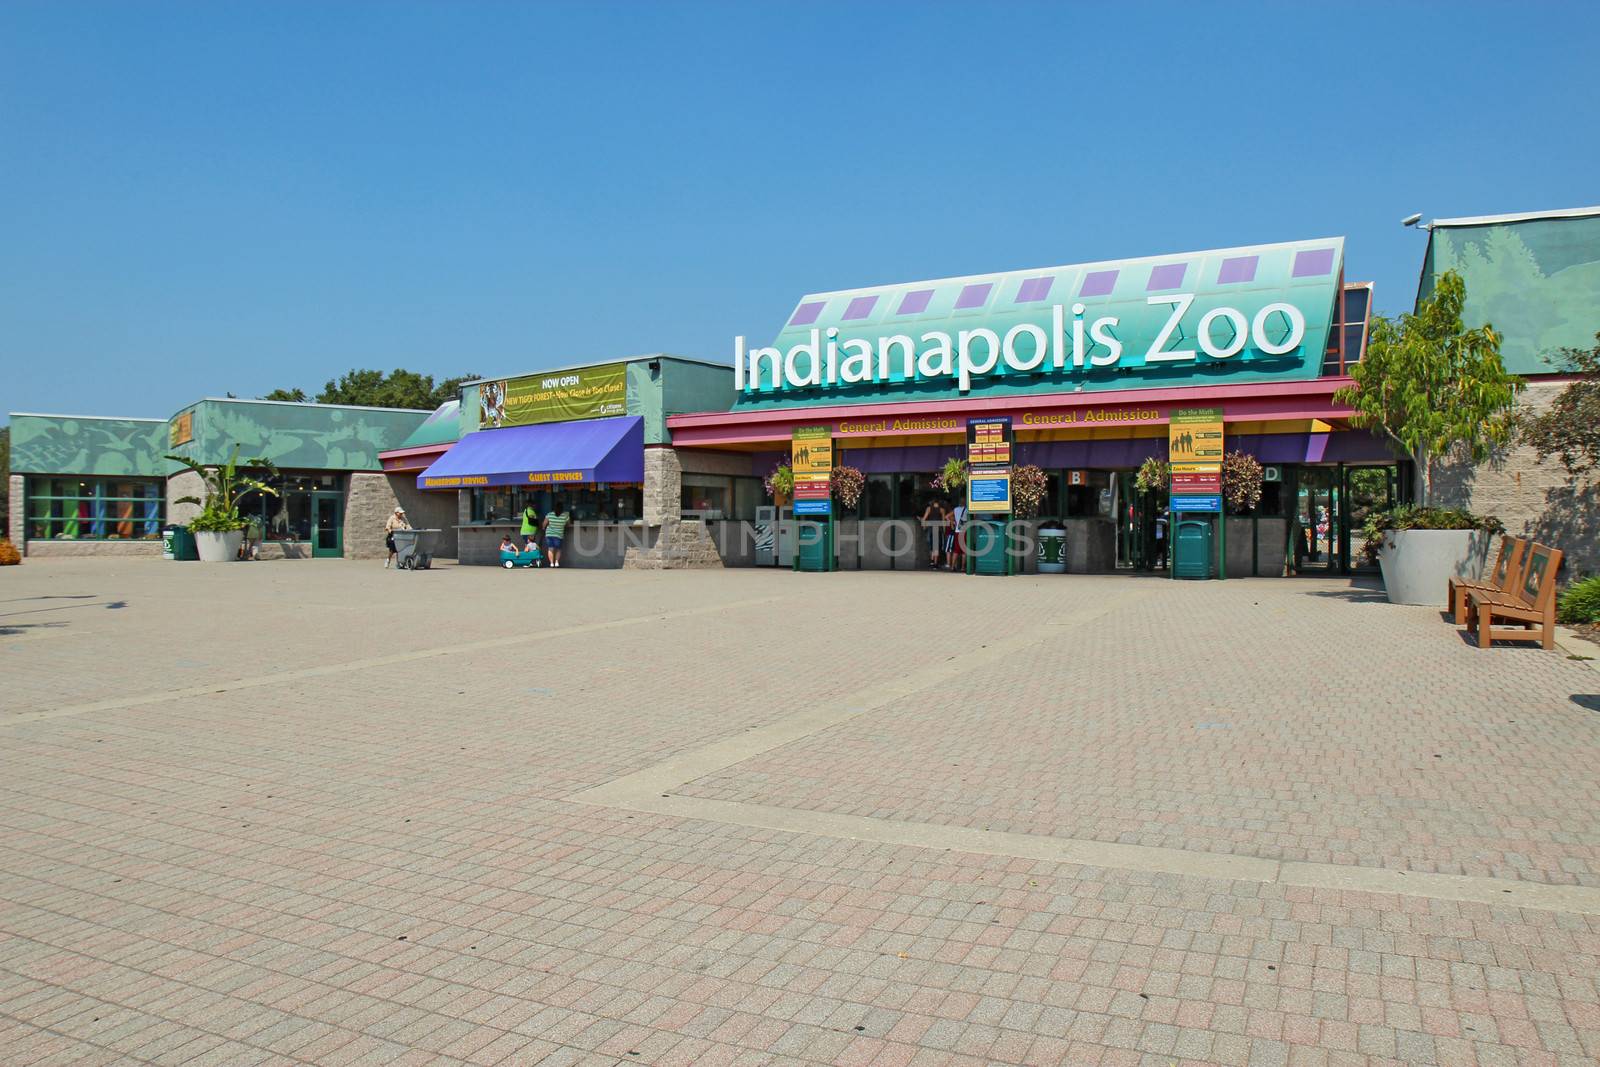 Entrance to the Indianapolis Zoo against a bright blue sky by sgoodwin4813